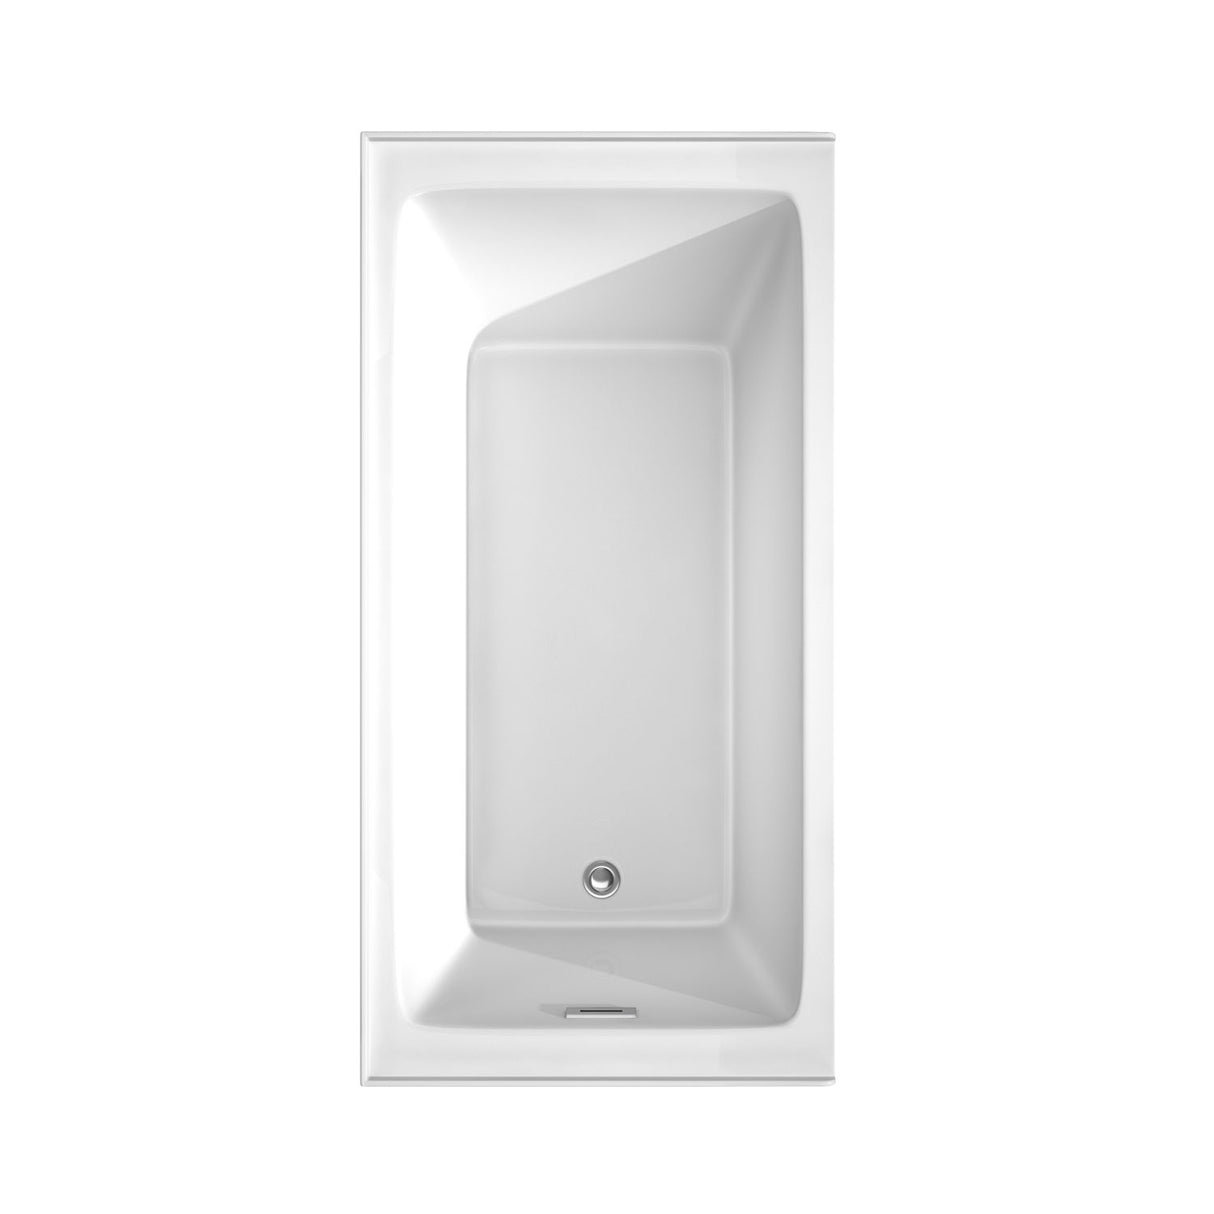 Grayley 60 x 30 Inch Alcove Bathtub in White with Left-Hand Drain and Overflow Trim in Polished Chrome